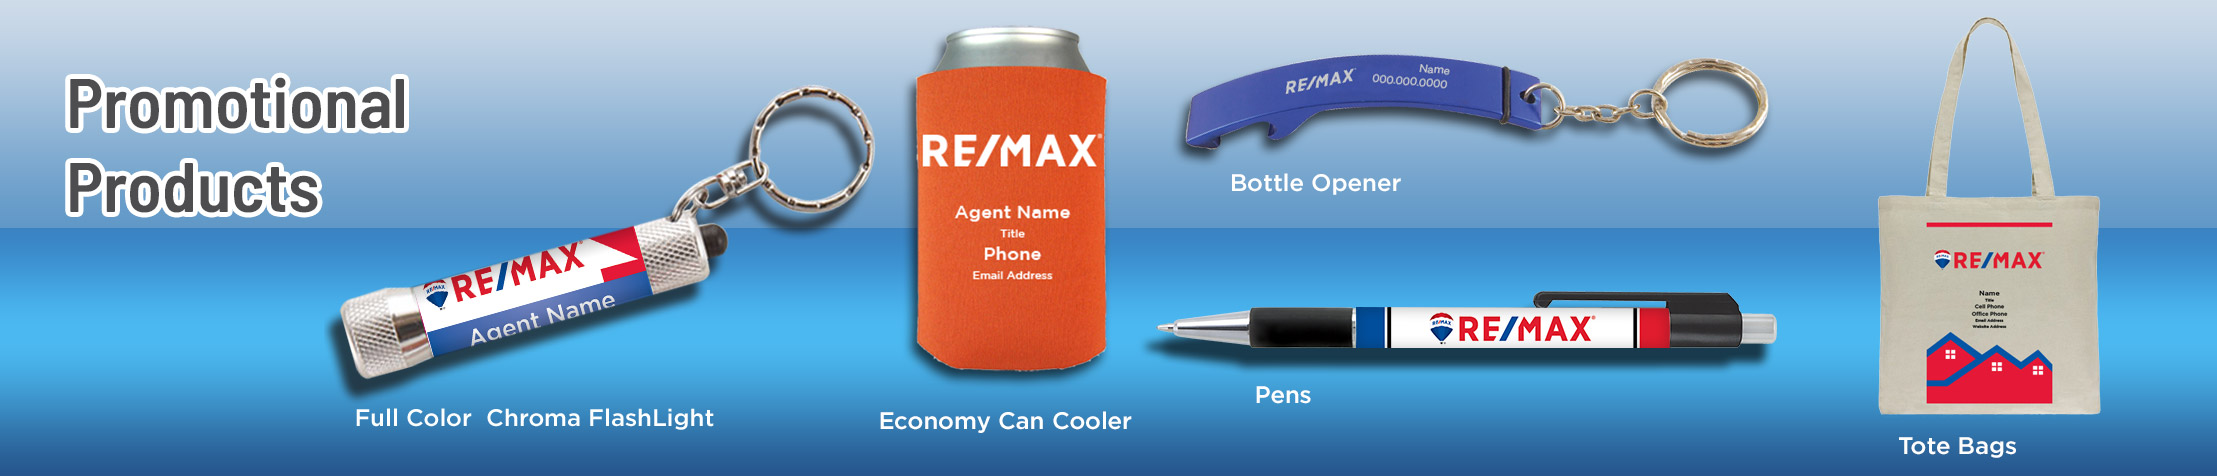 RE/MAX Real Estate Promotional Products - RE/MAX  personalized promotional pens, key chains, tote bags, flashlights, mugs | Sparkprint.com